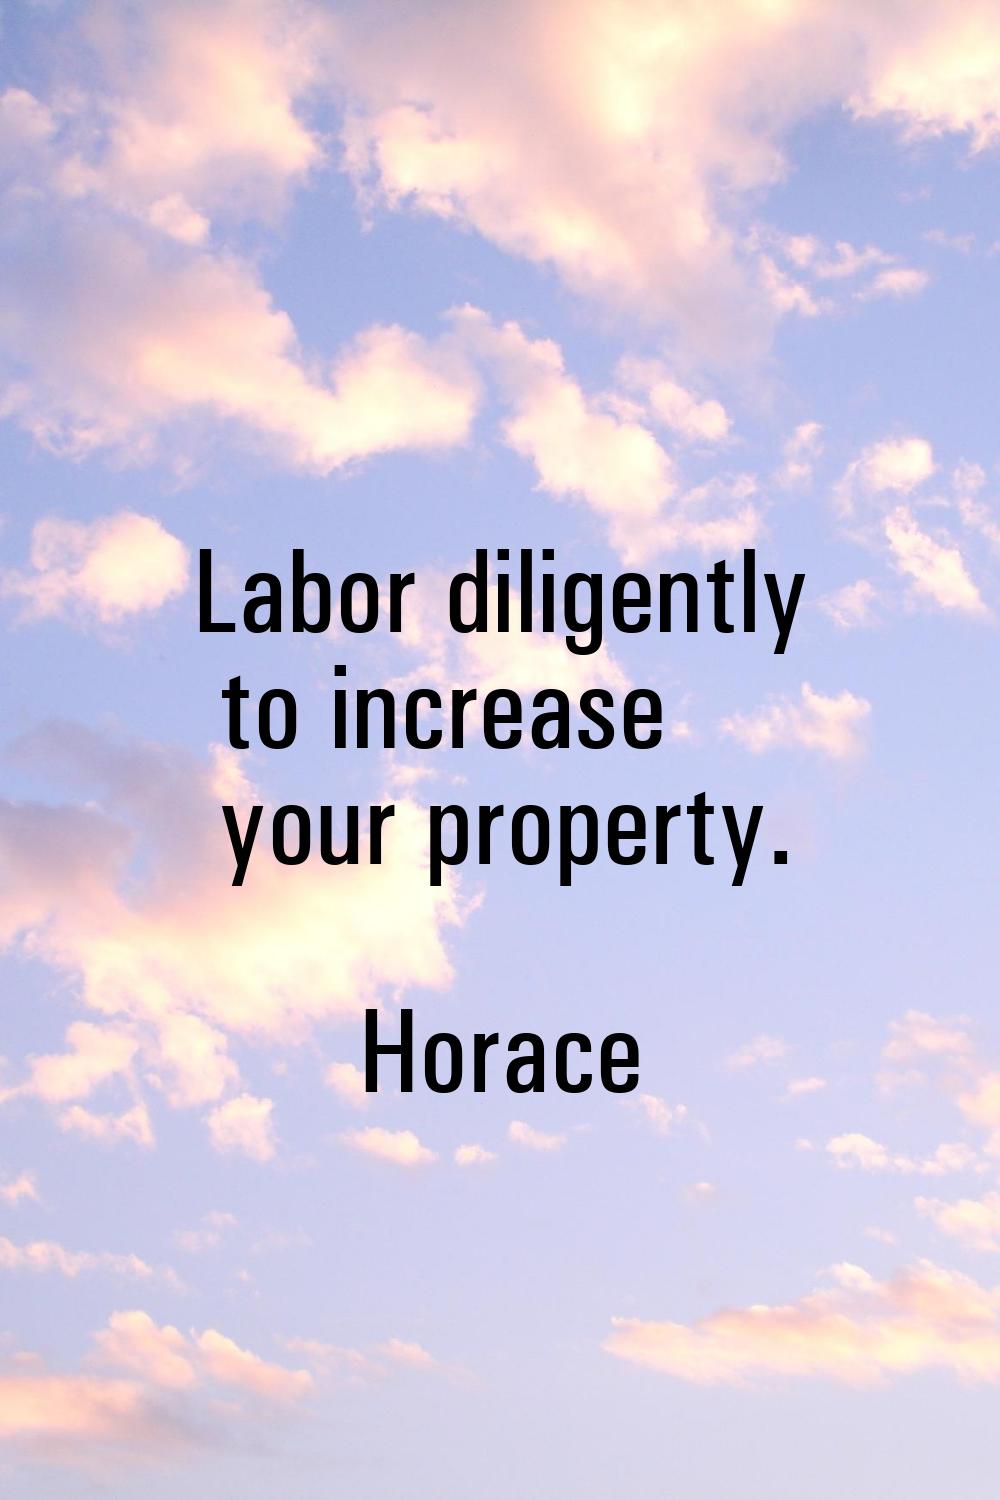 Labor diligently to increase your property.